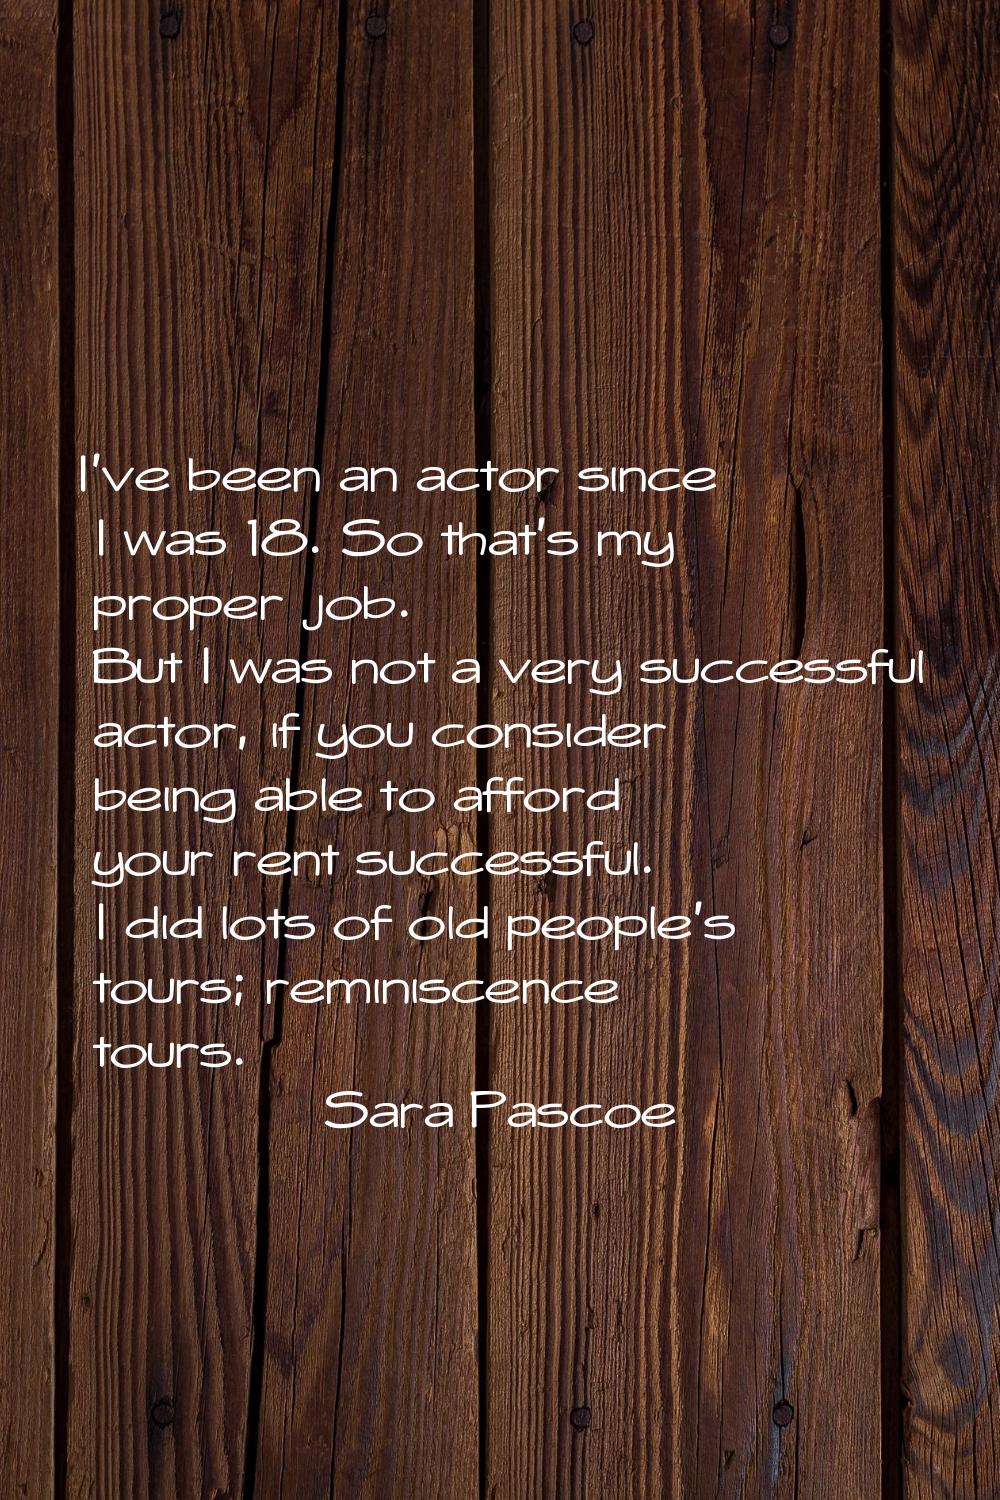 I've been an actor since I was 18. So that's my proper job. But I was not a very successful actor, 